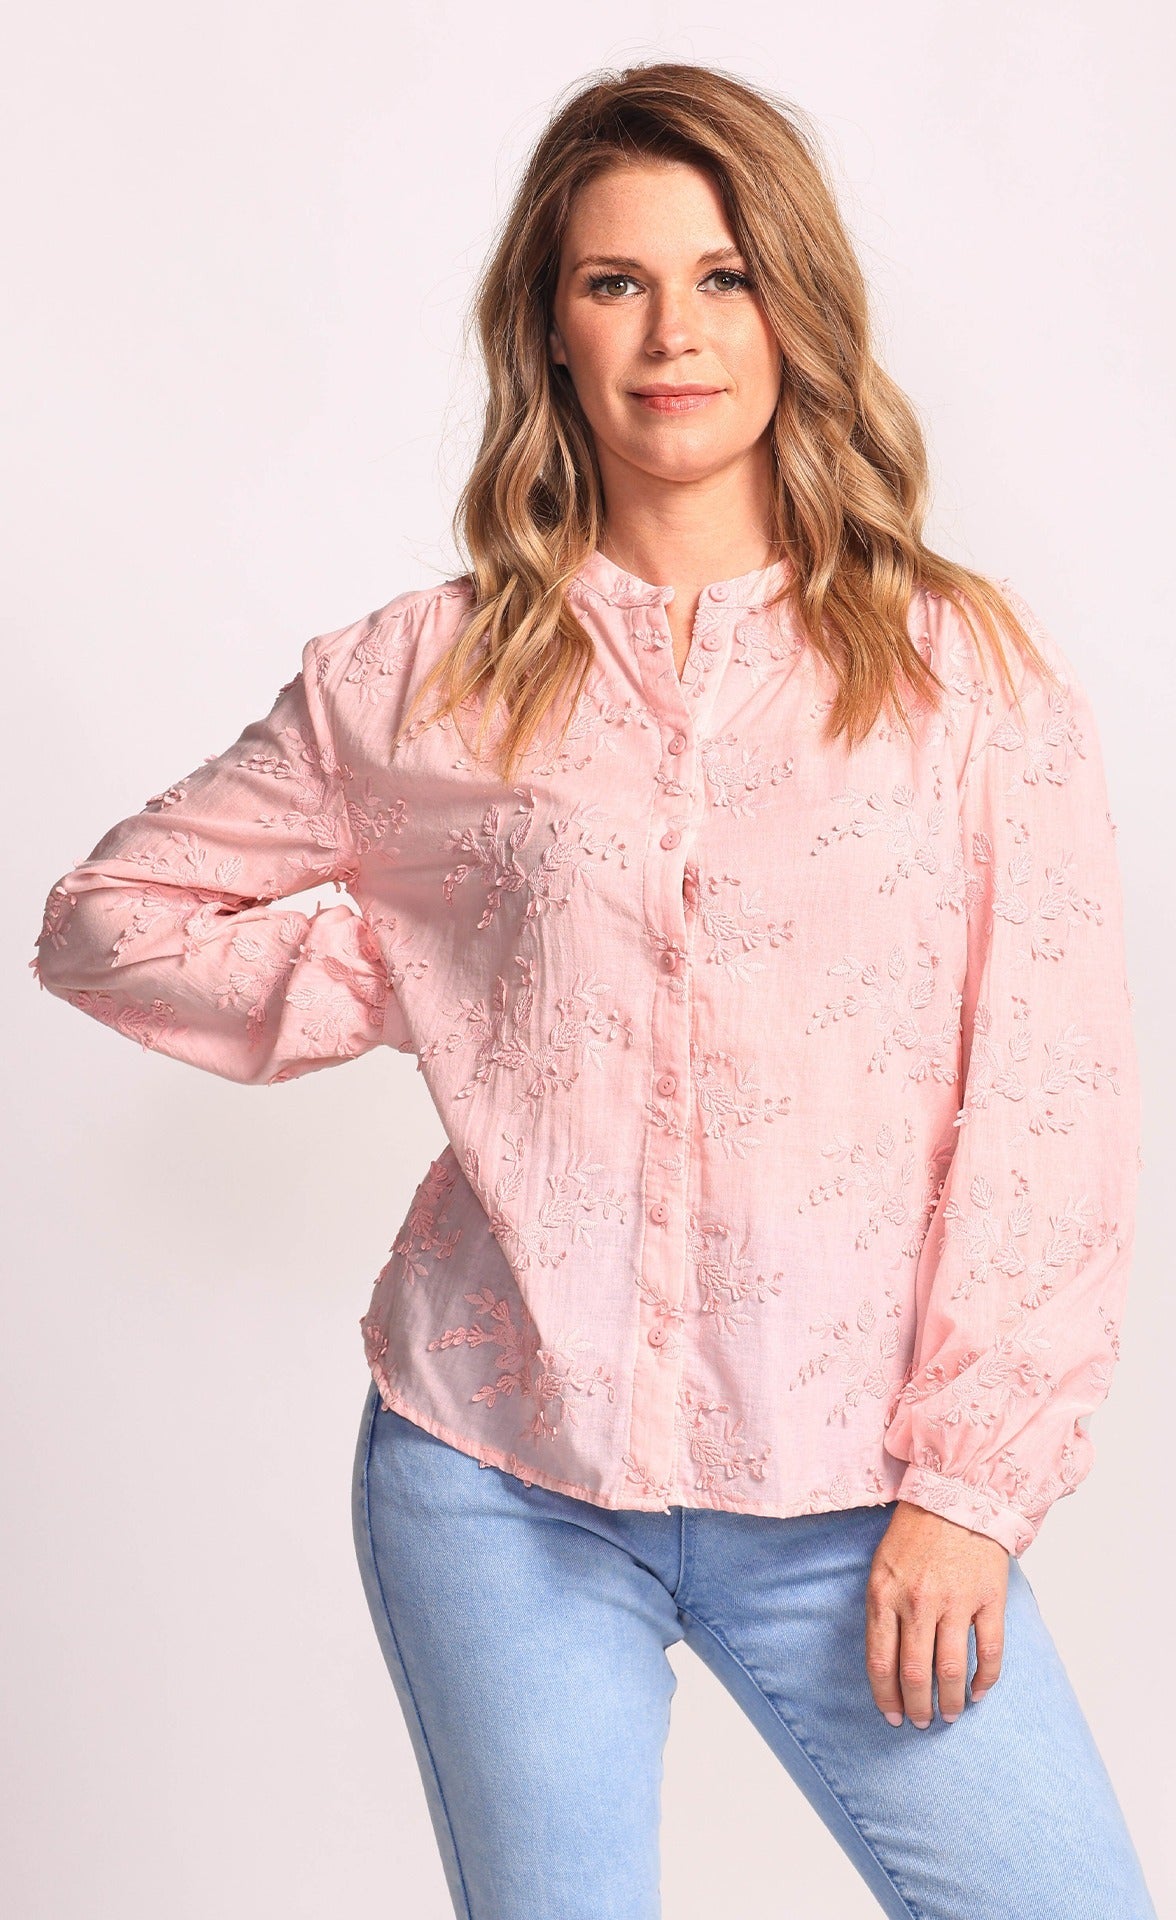 Mia Top - Pink